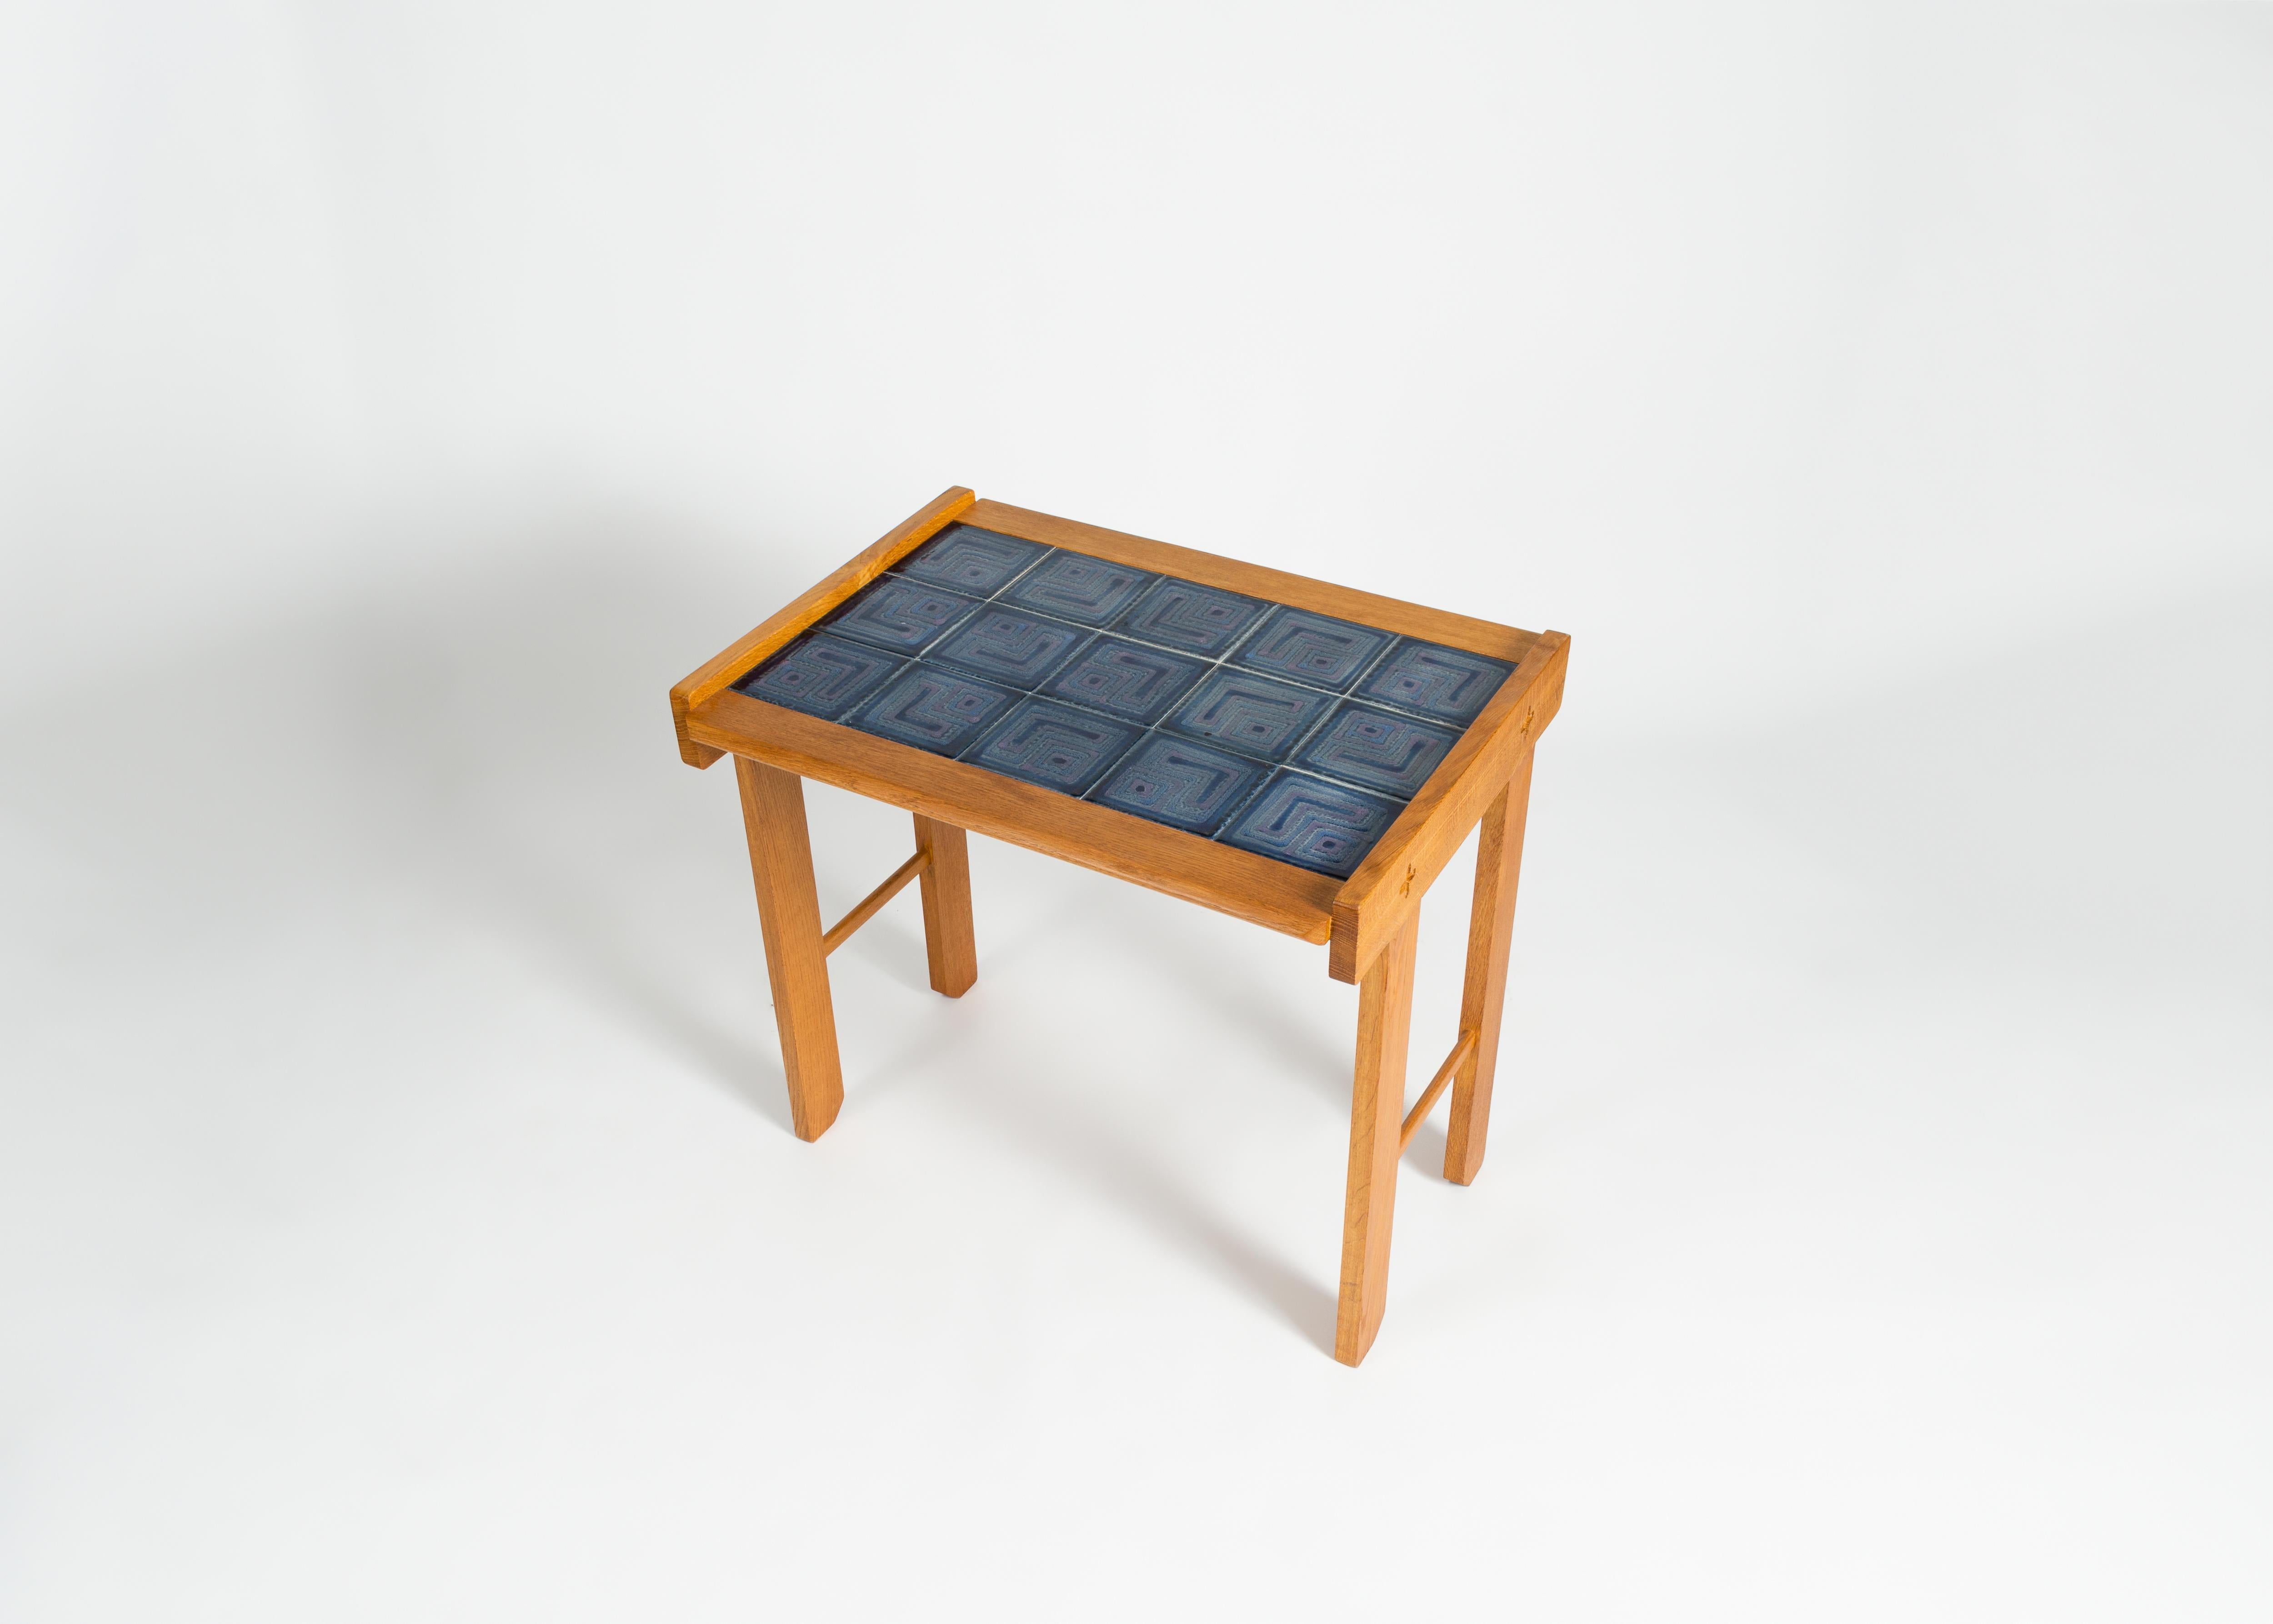 Ceramic Guillerme et Chambron, Tile-Topped Oak Writing Table, France, Mid-20th Century For Sale